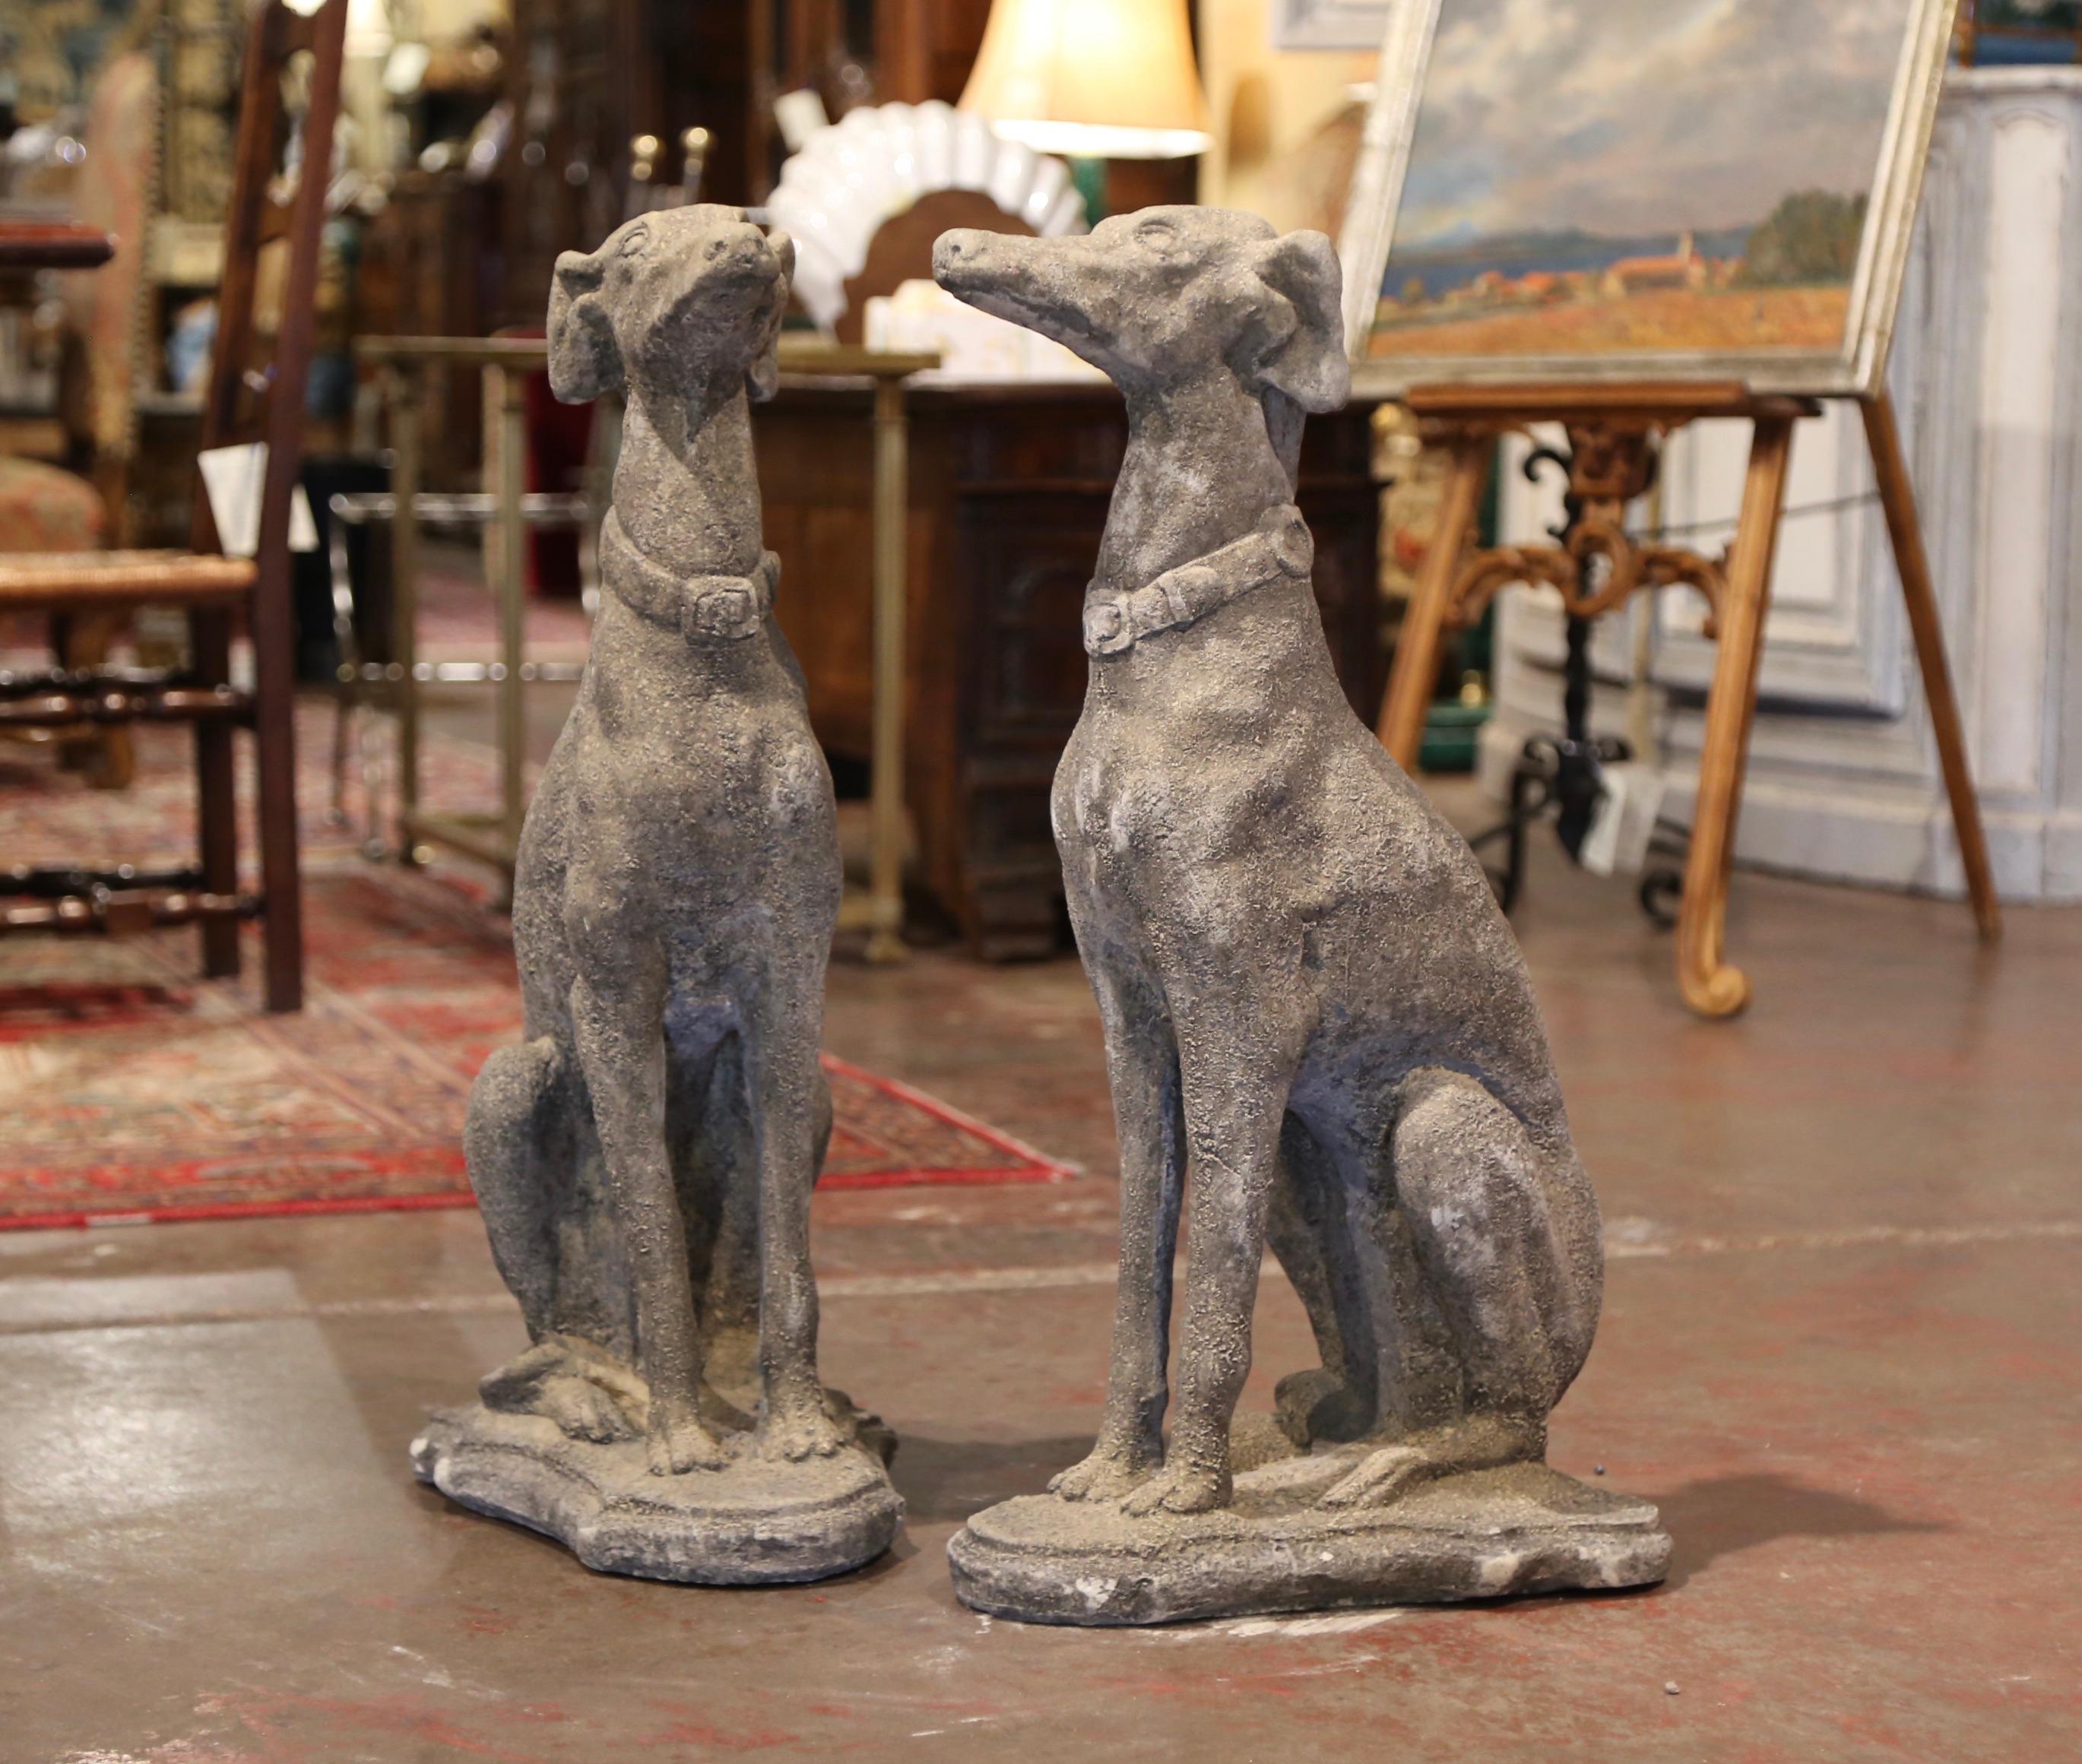 Carved of stone circa 2000, the tall vintage greyhounds are set on a flat carved base; sited on their back legs, both dogs have a proud expression further embellished with a collar around their neck. The garden sculpted canines have a weathered